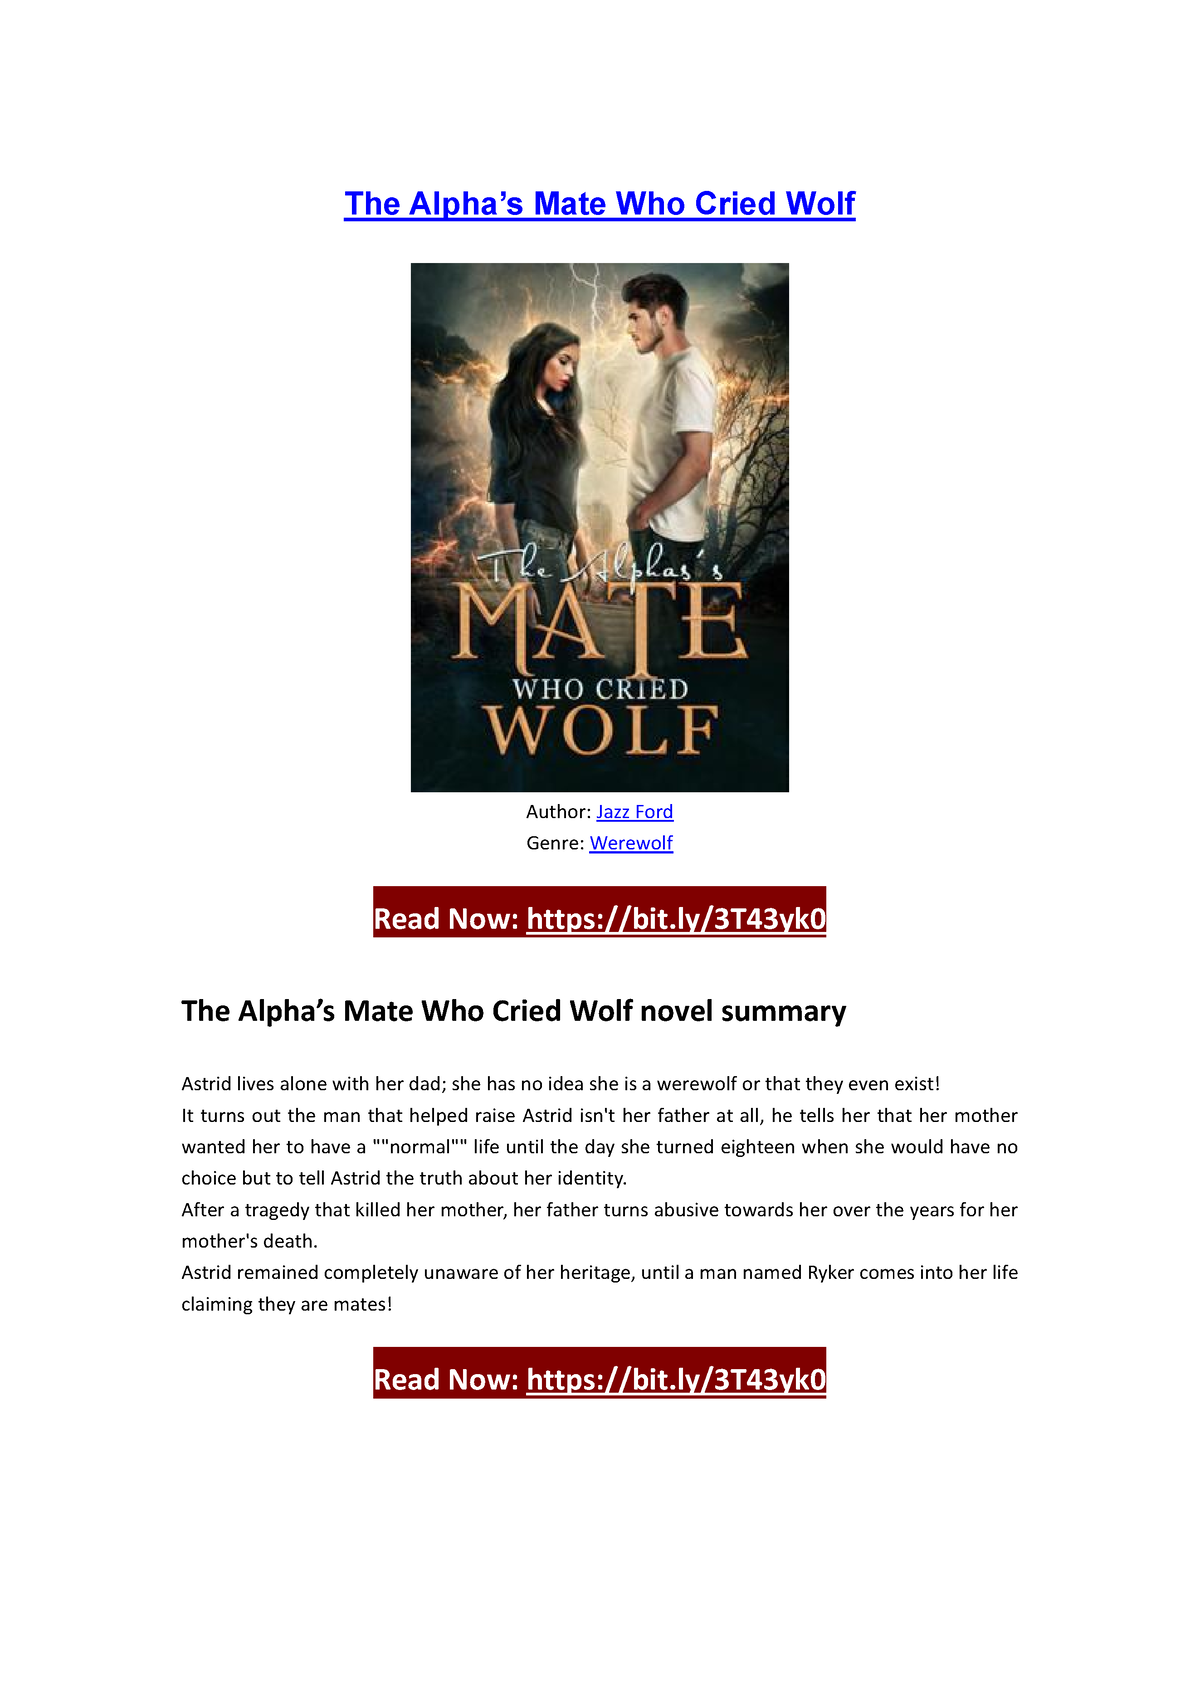 The alphas mate who cried wolf free download adobe reader 9.5 free download for windows 7 full version